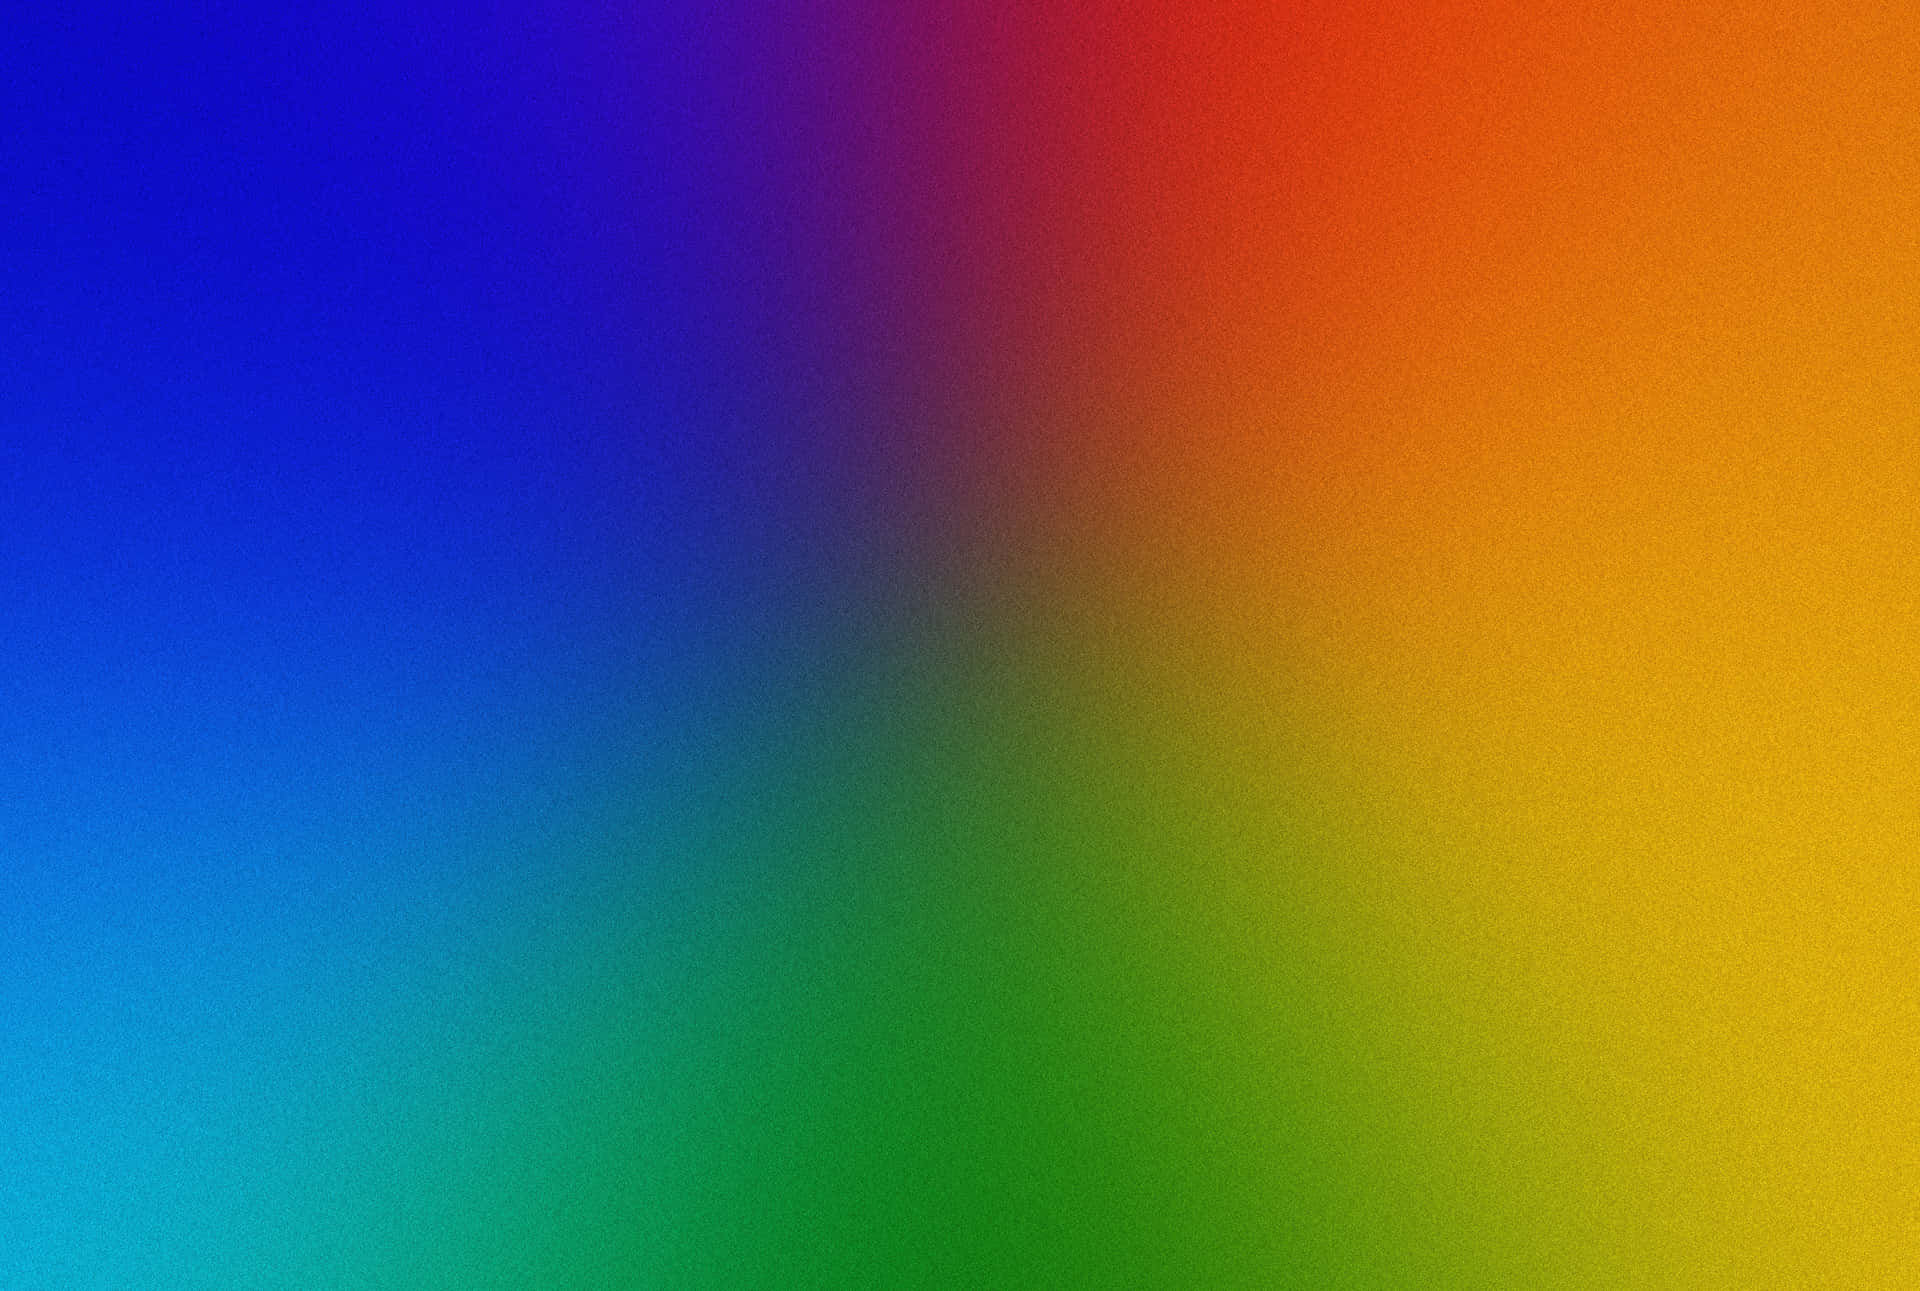 A rainbow with a smooth transition of colors